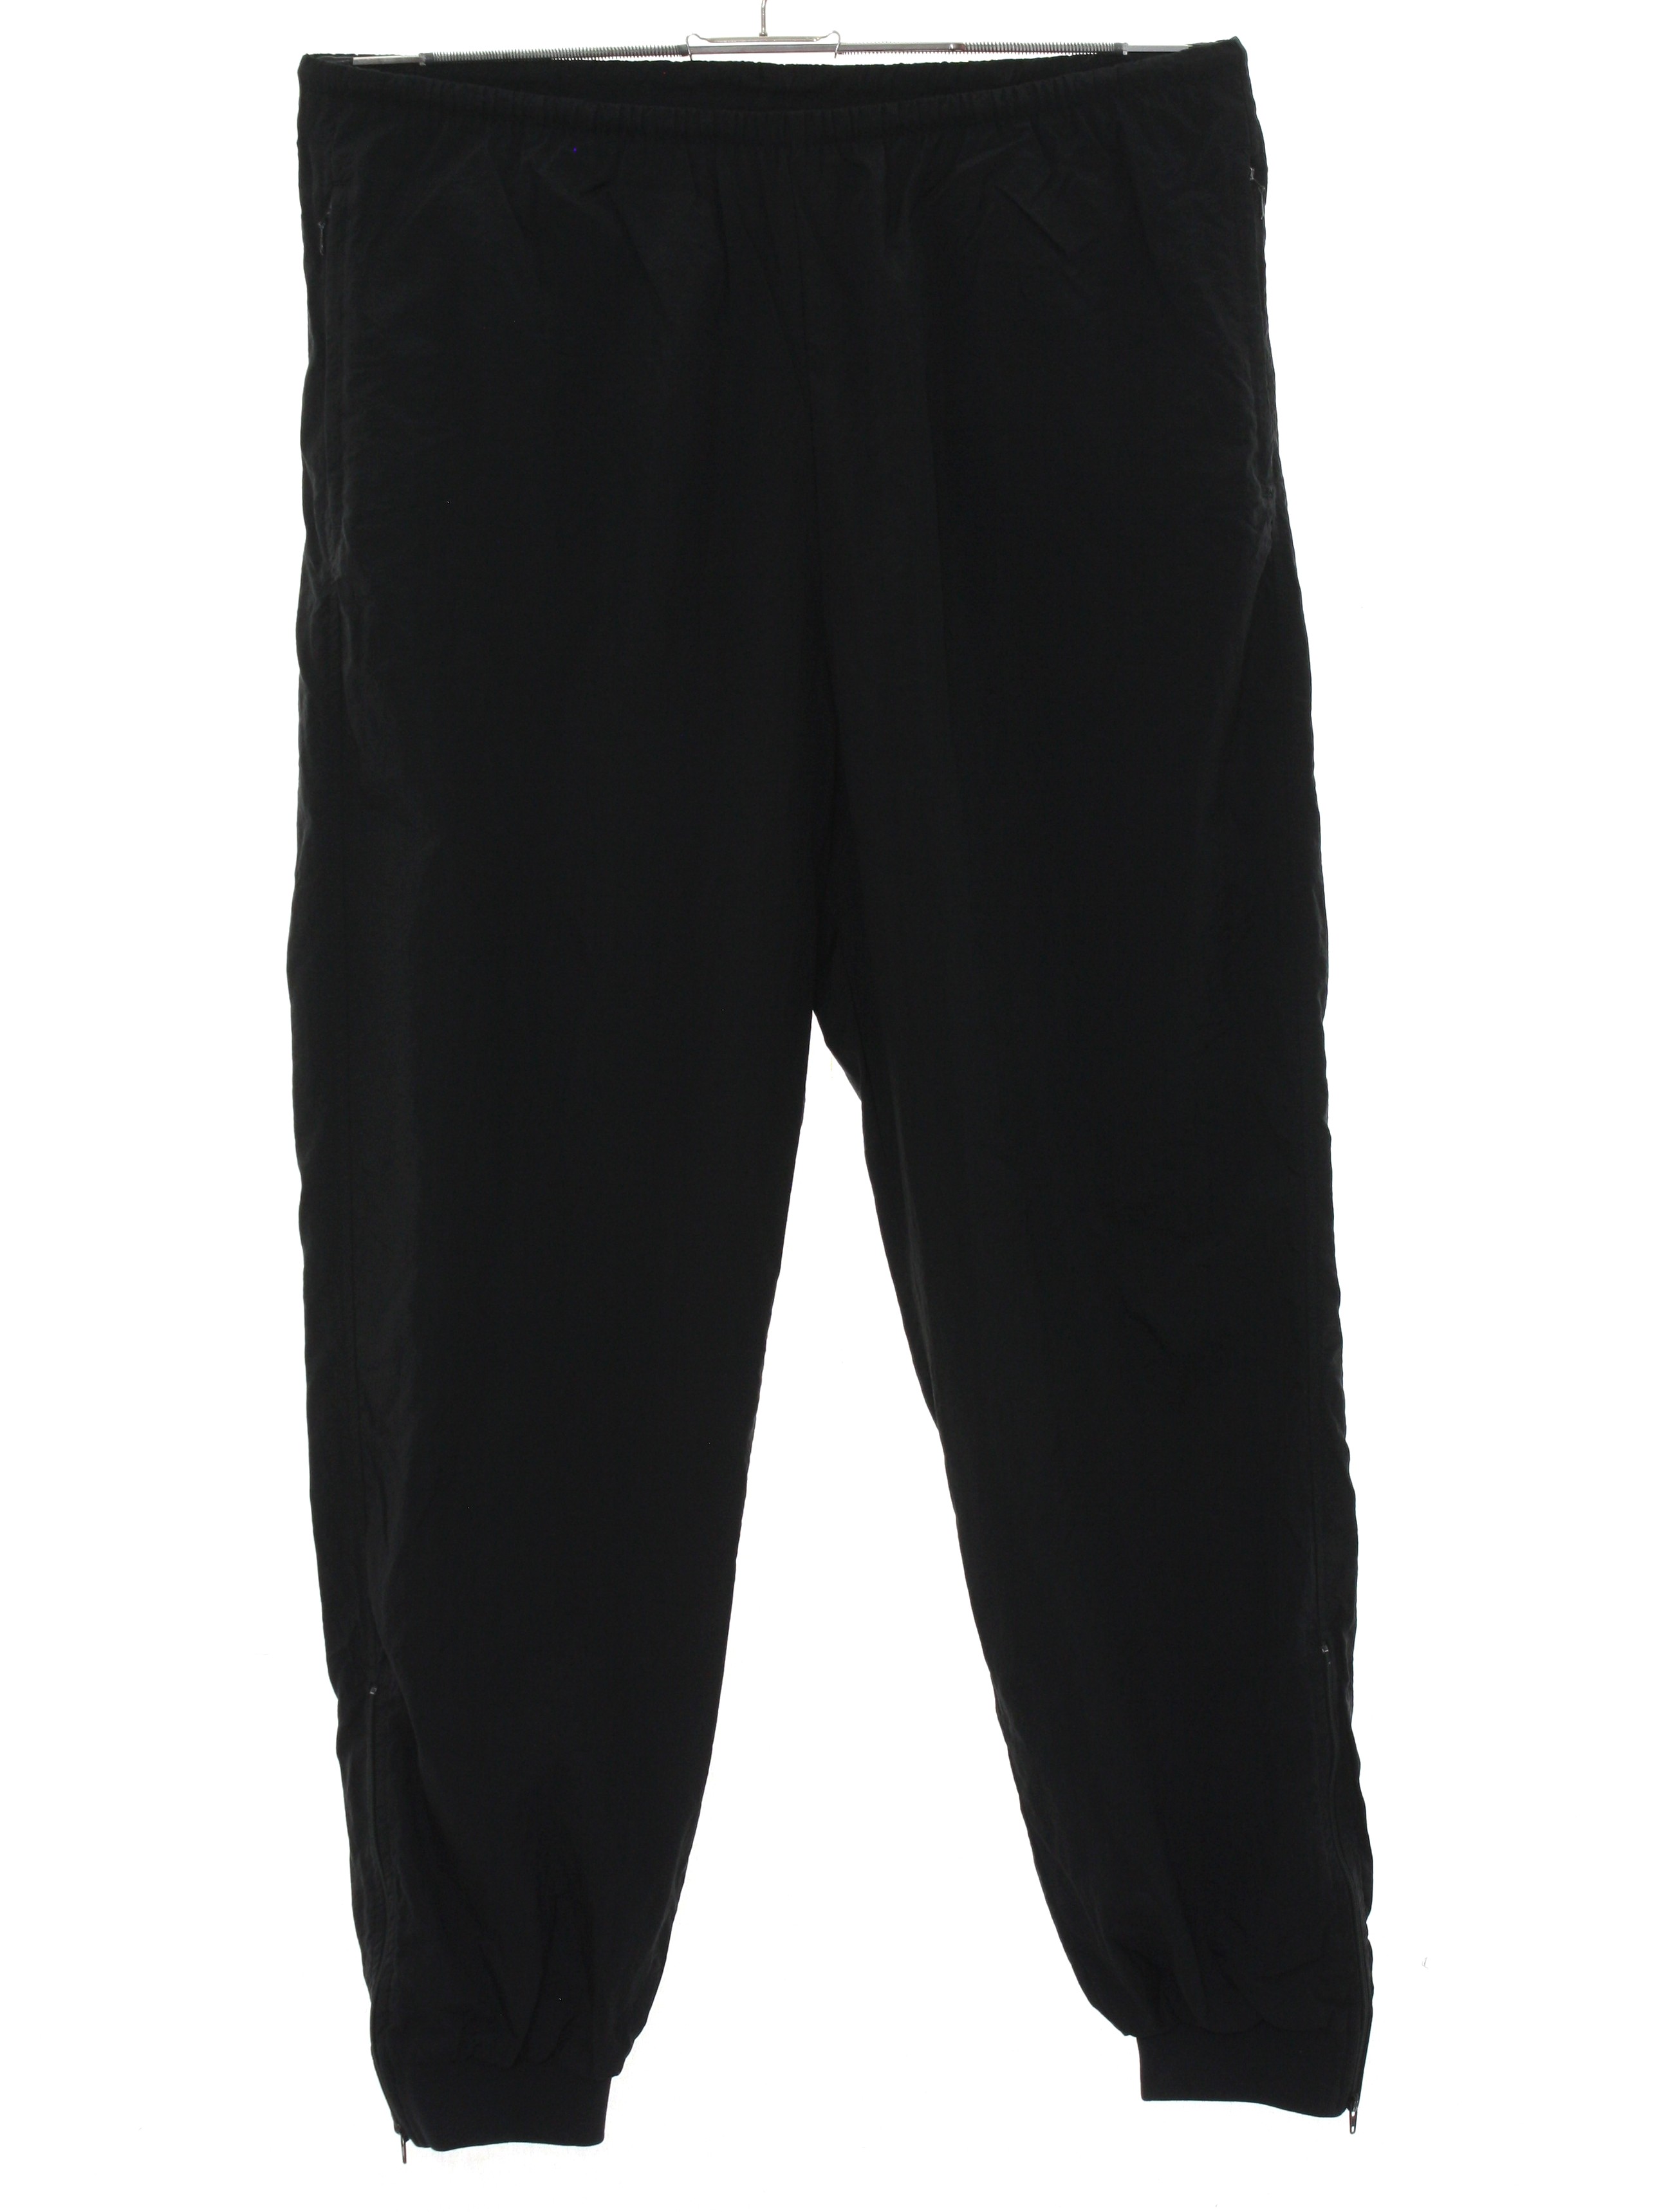 Pants: 90s -Nike- Mens black solid colored nylon flat front, slightly ...